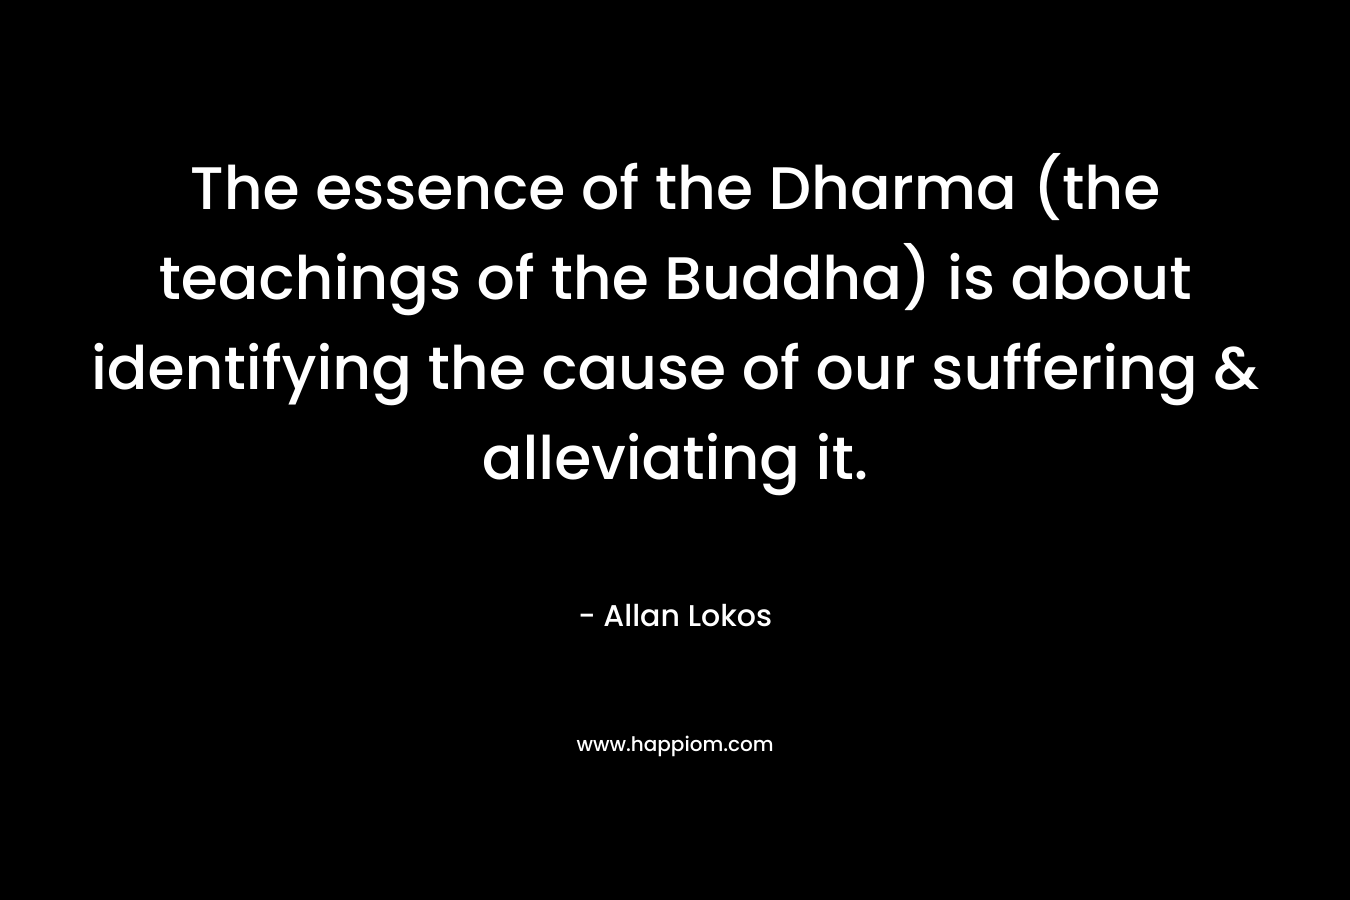 The essence of the Dharma (the teachings of the Buddha) is about identifying the cause of our suffering & alleviating it.